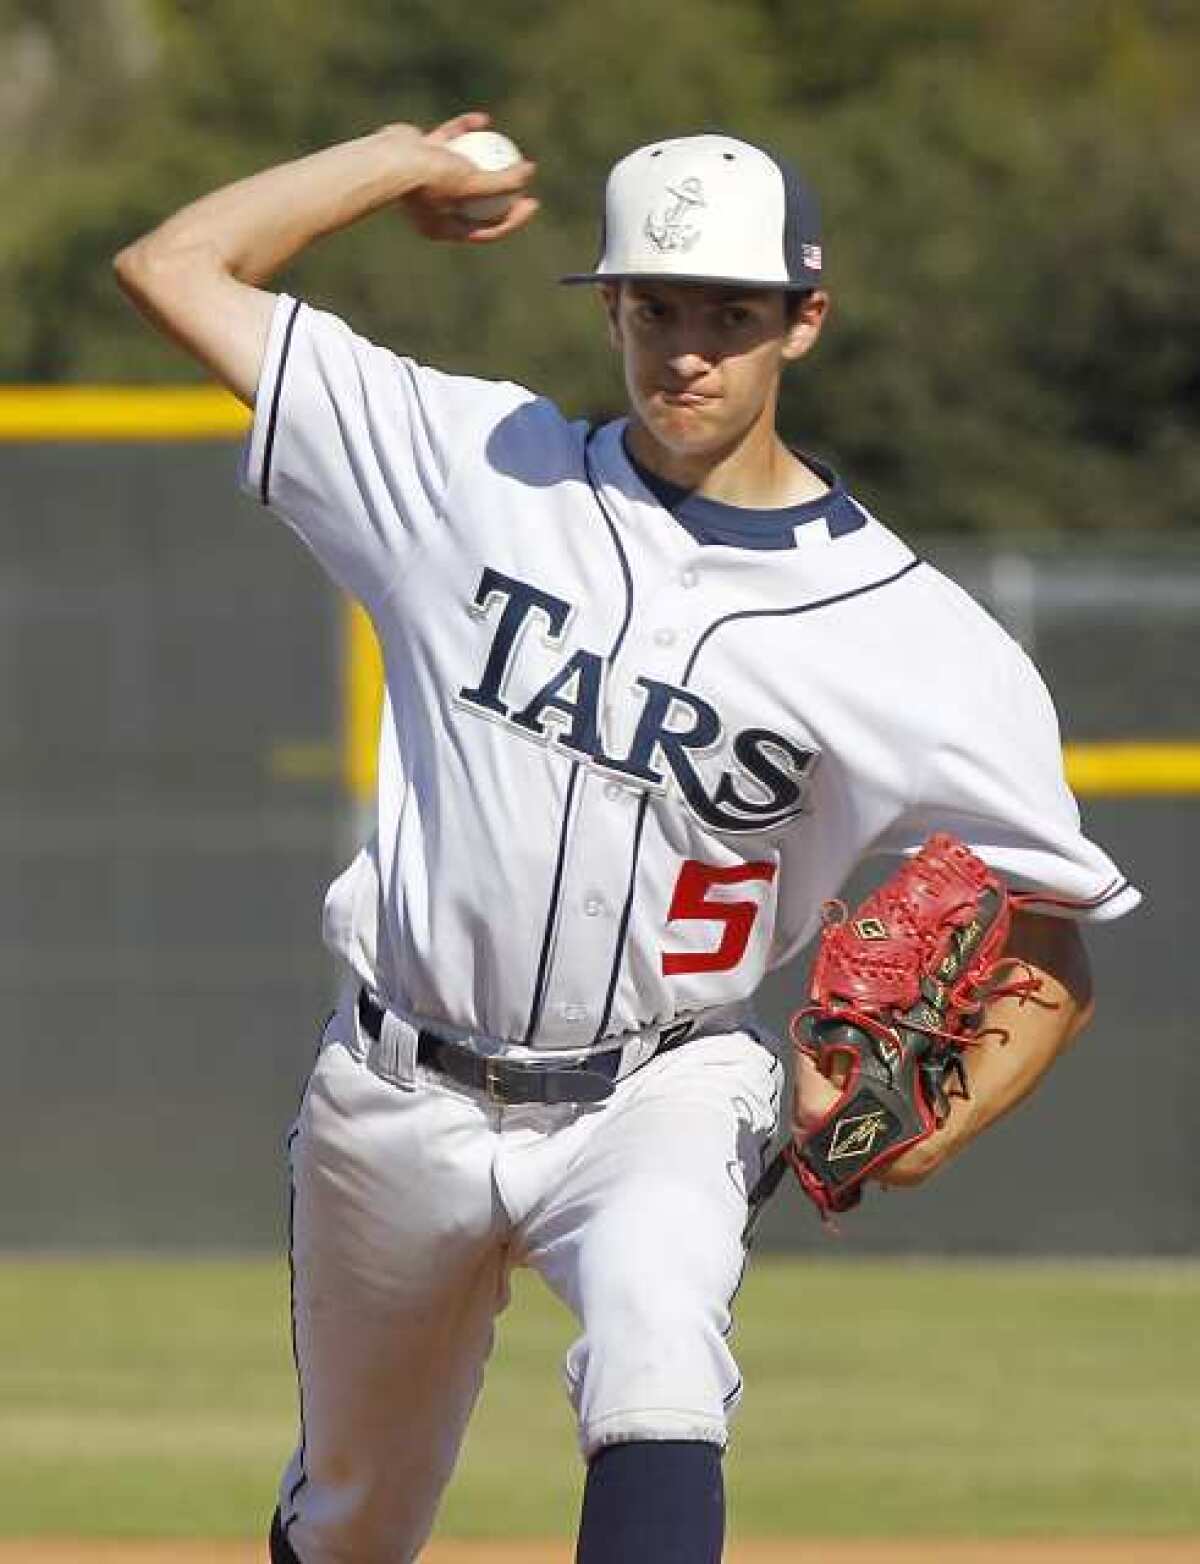 Newport Harbor's Connor Seabold hurls a pitch in the Beach Pit Classic against Greeley West of Colorado Tuesday.